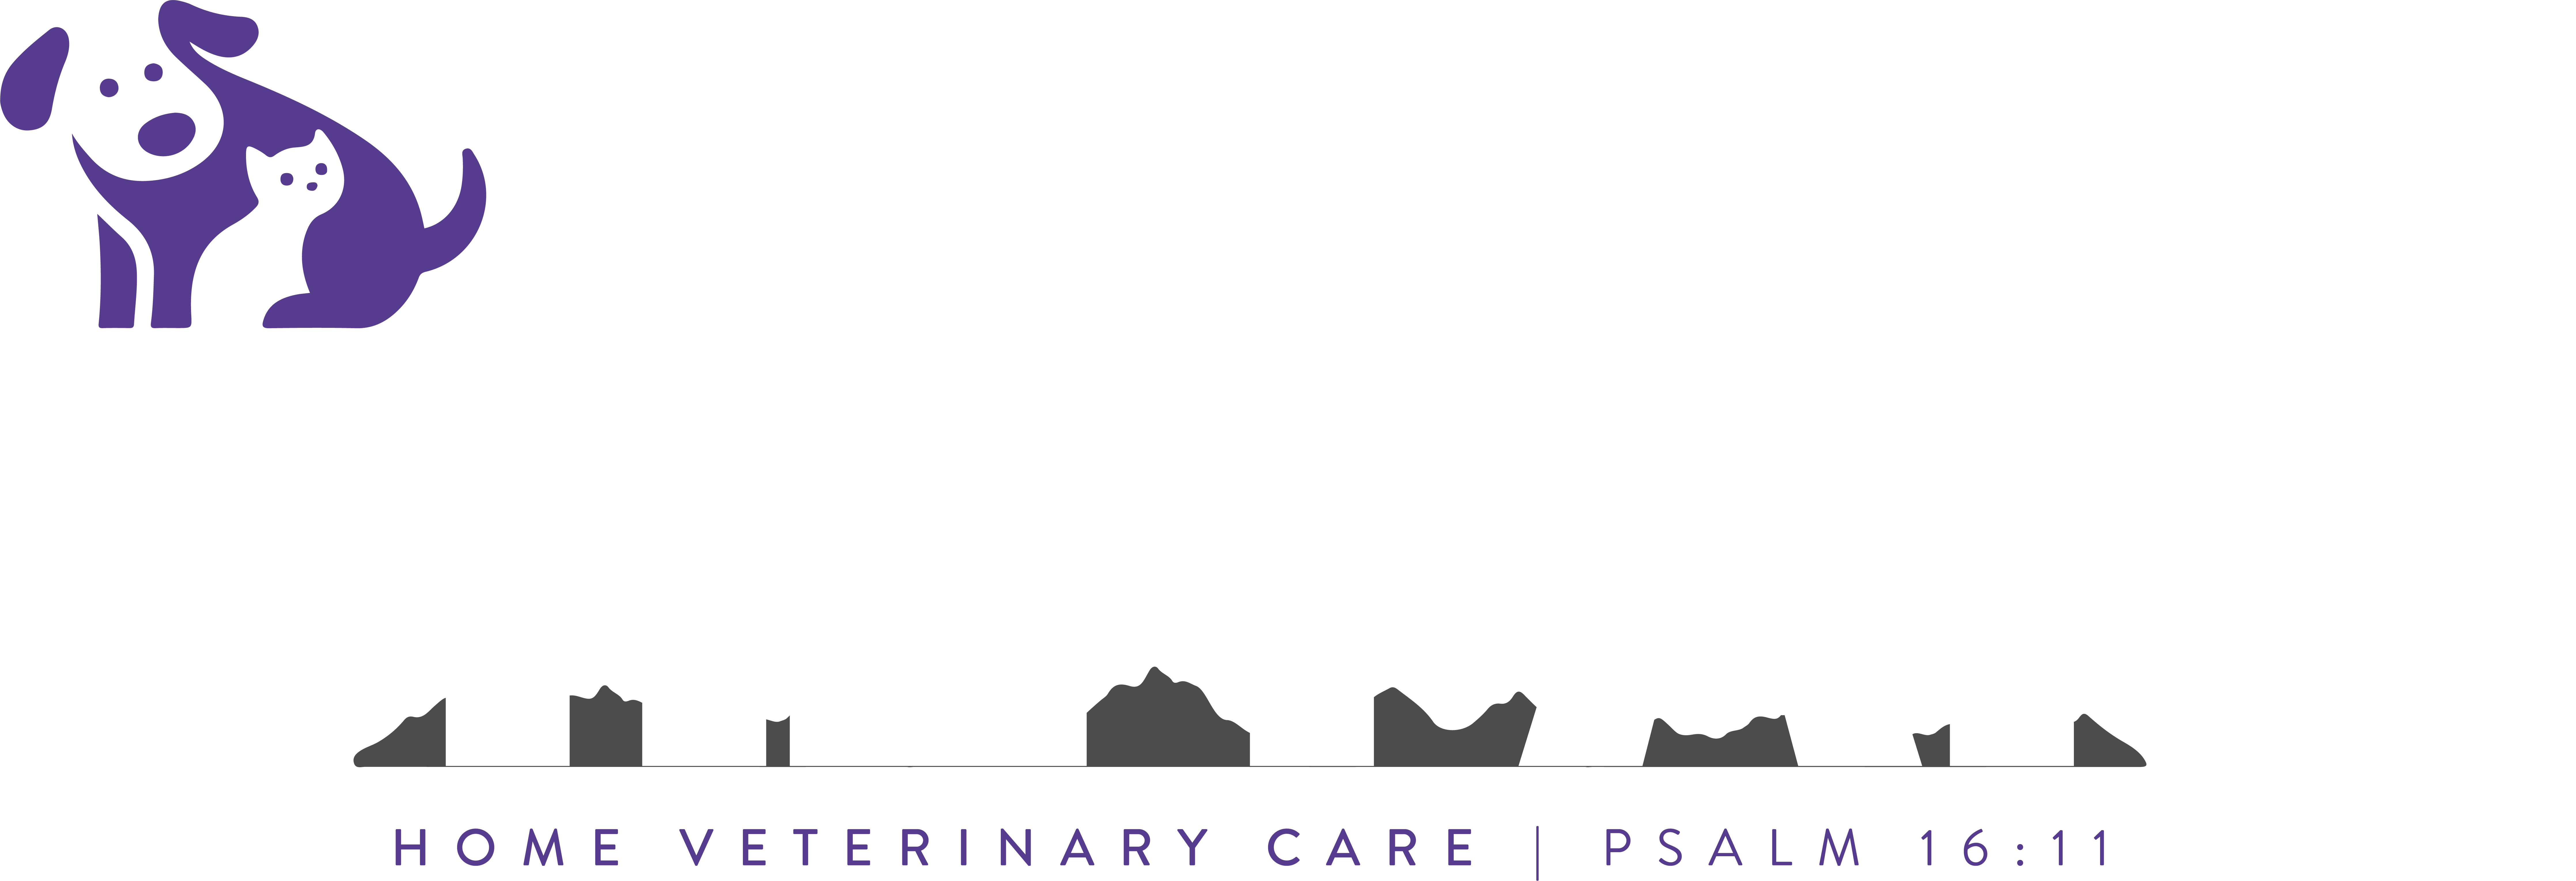 The Path Home Veterinary Care